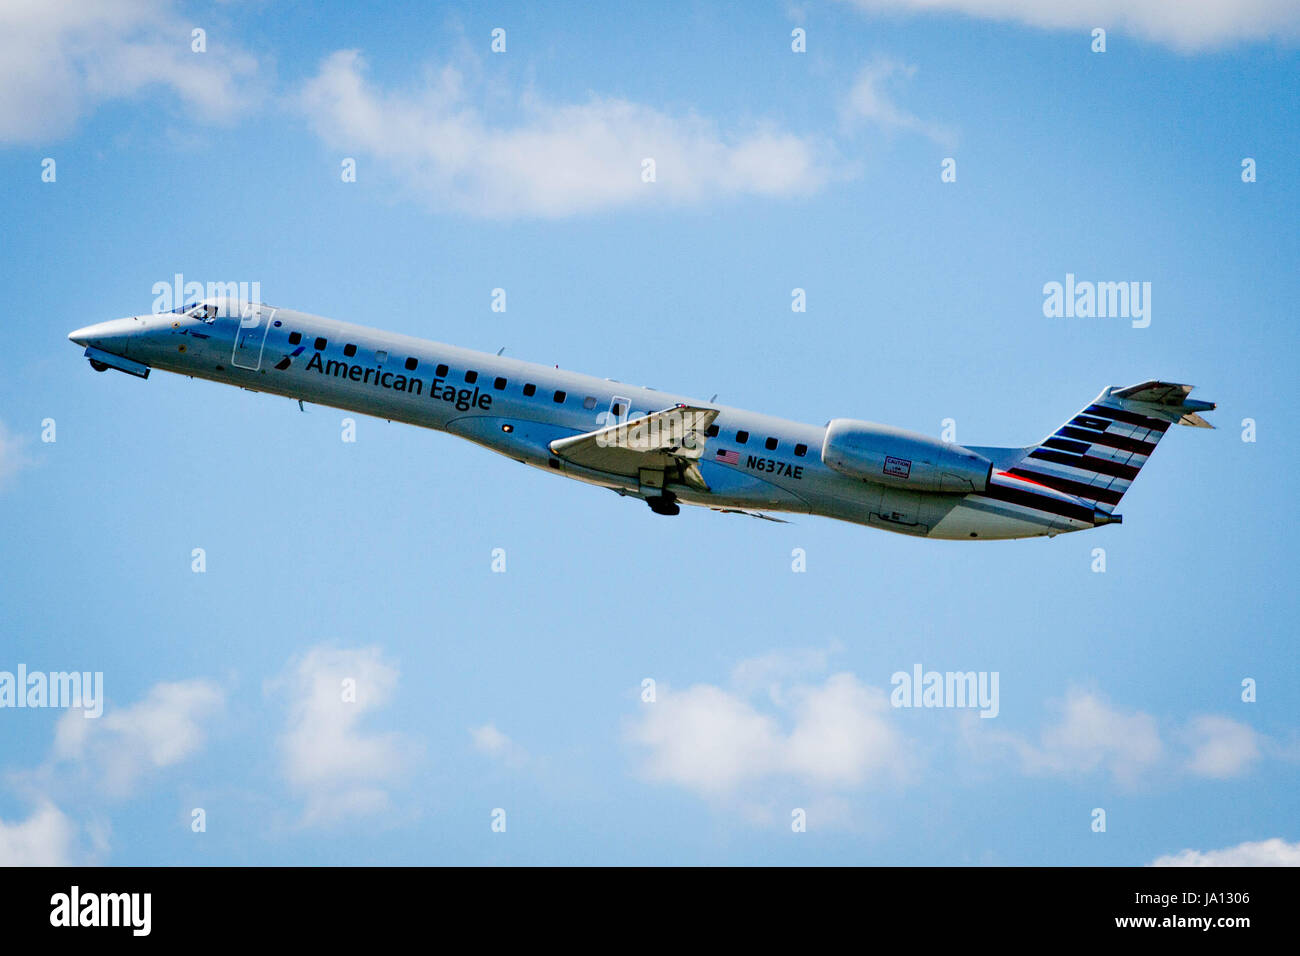 An American Eagle commuter aircraft takes off from Philadelphia International Airport Stock Photo